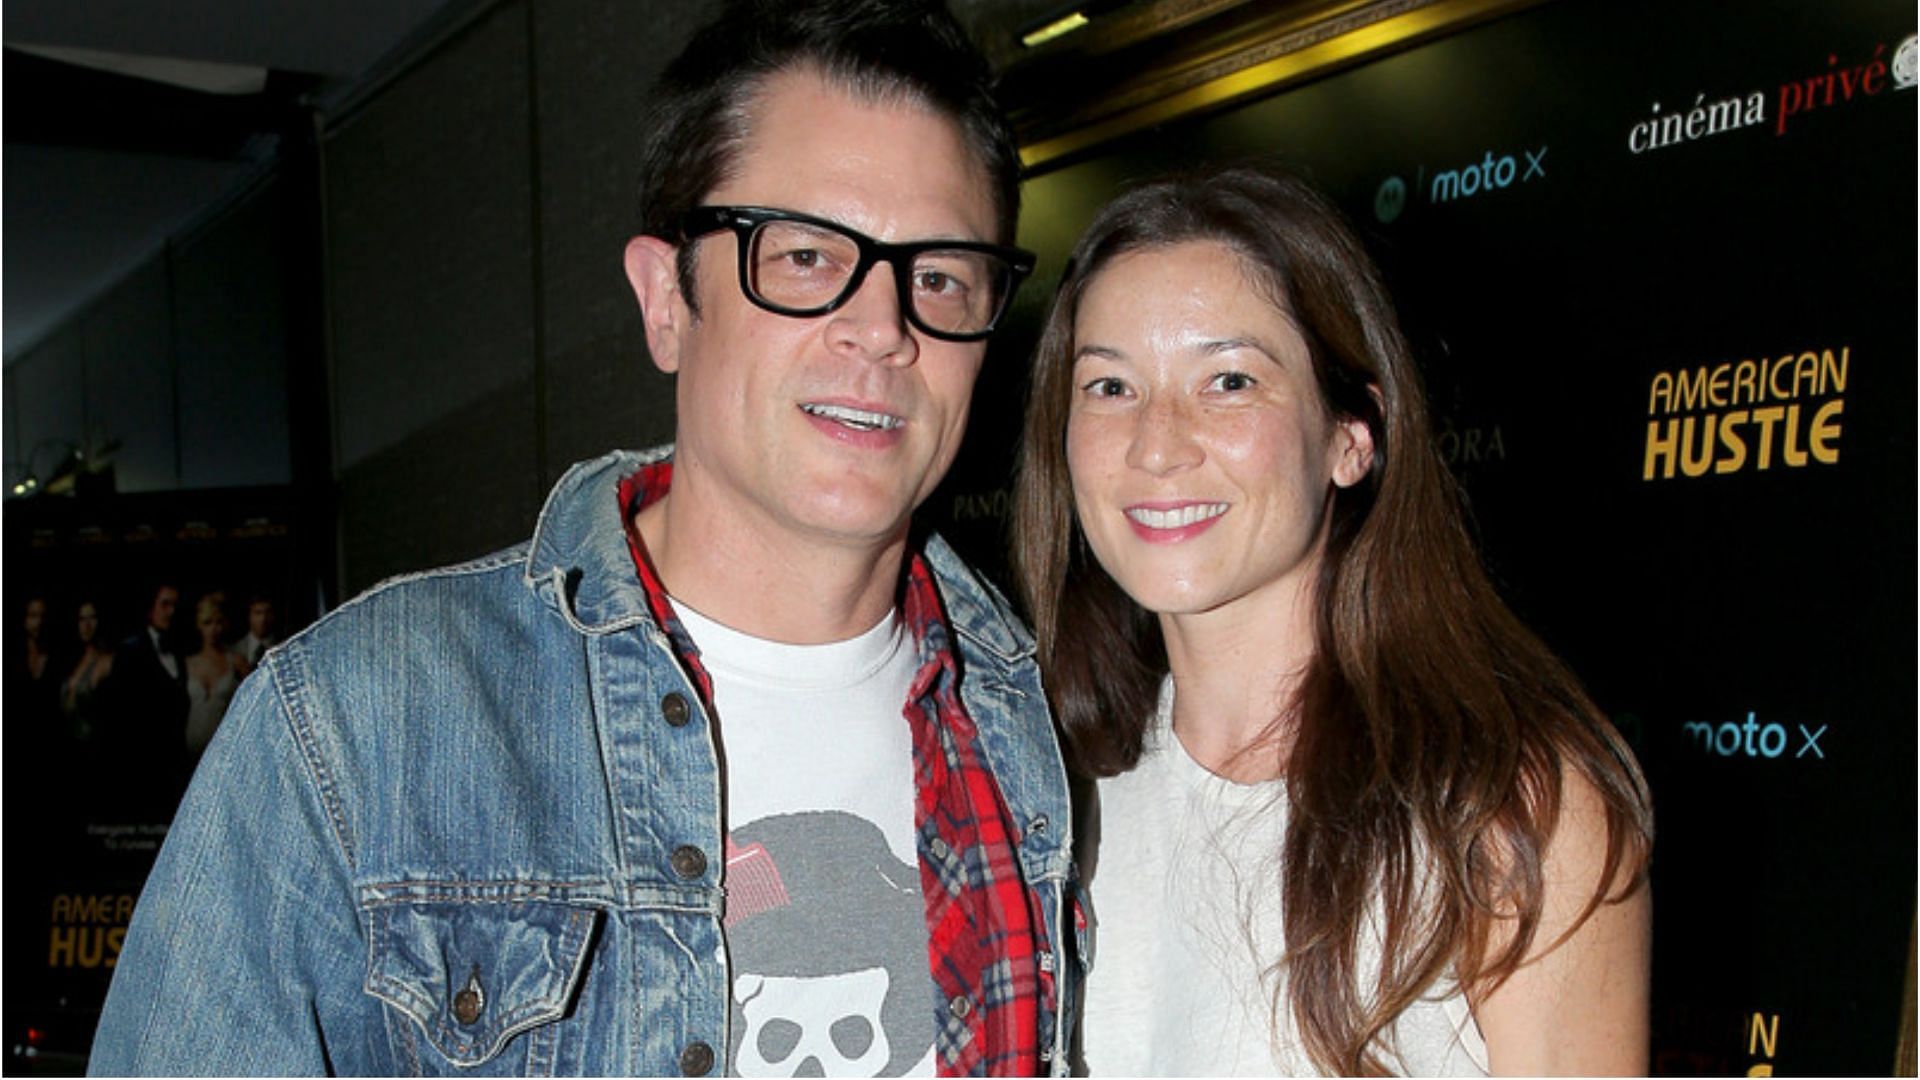 Johnny Knoxville and Naomi Nelson made their relationship public in 2009 (Image via Getty Images)